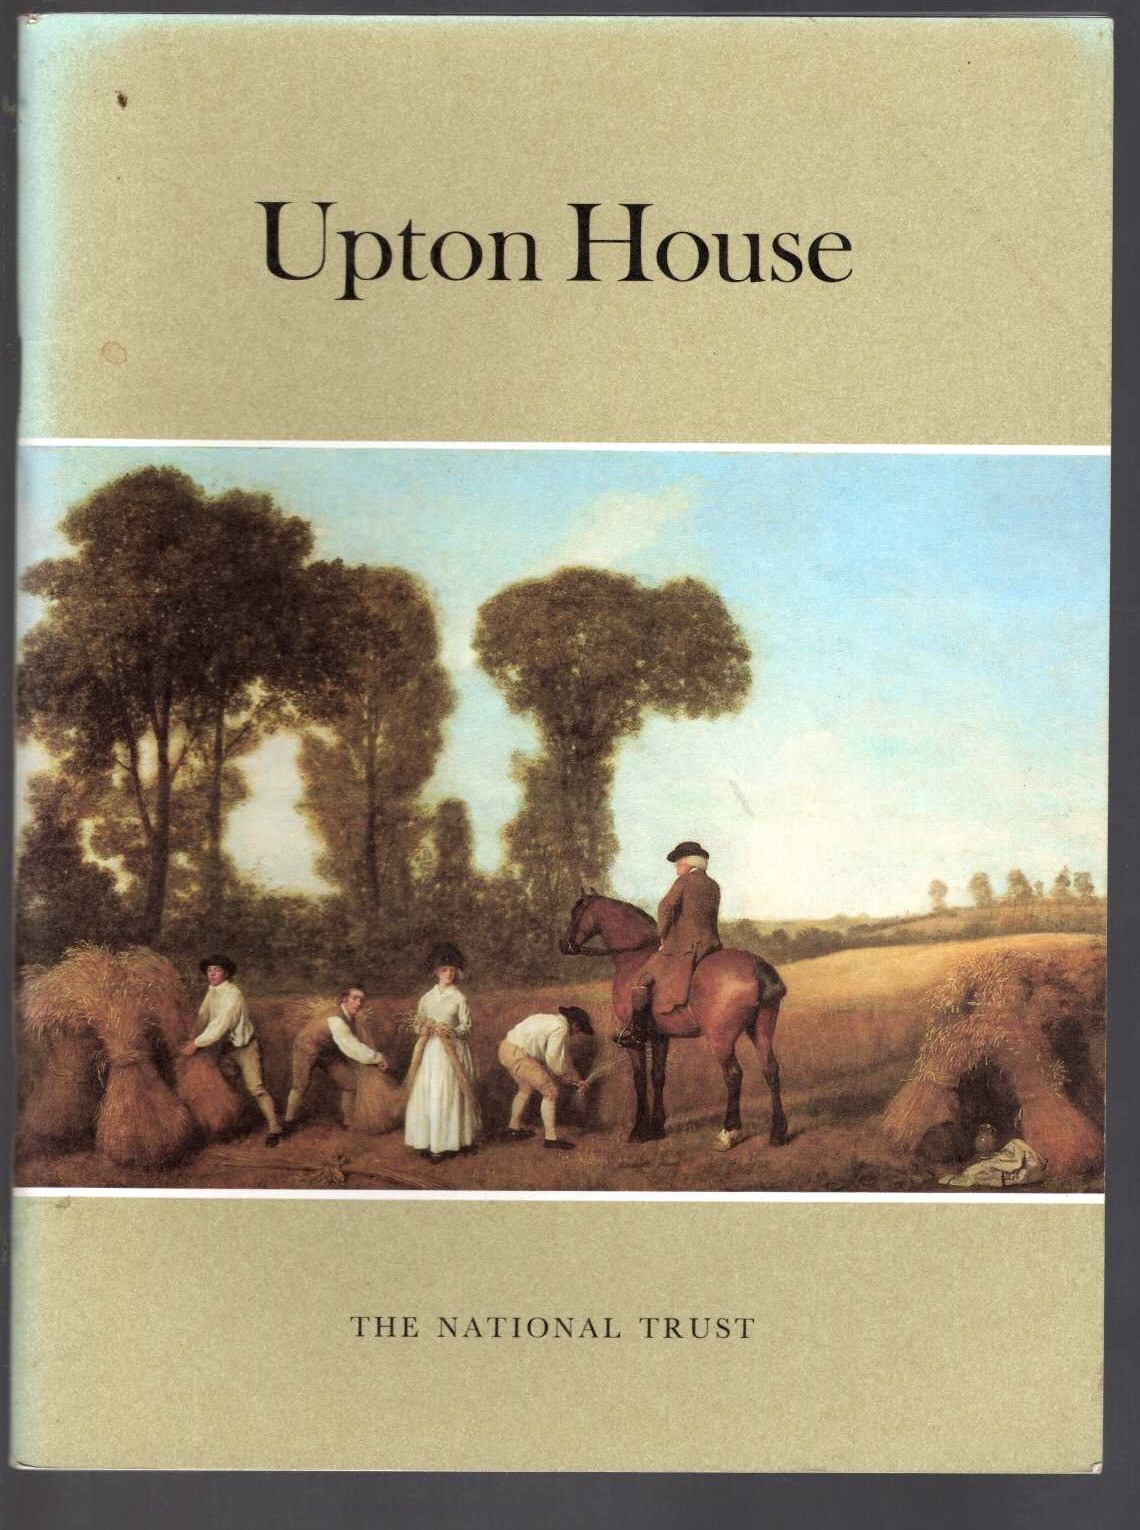 \ UPTON HOUSE by The National Trust front book cover image